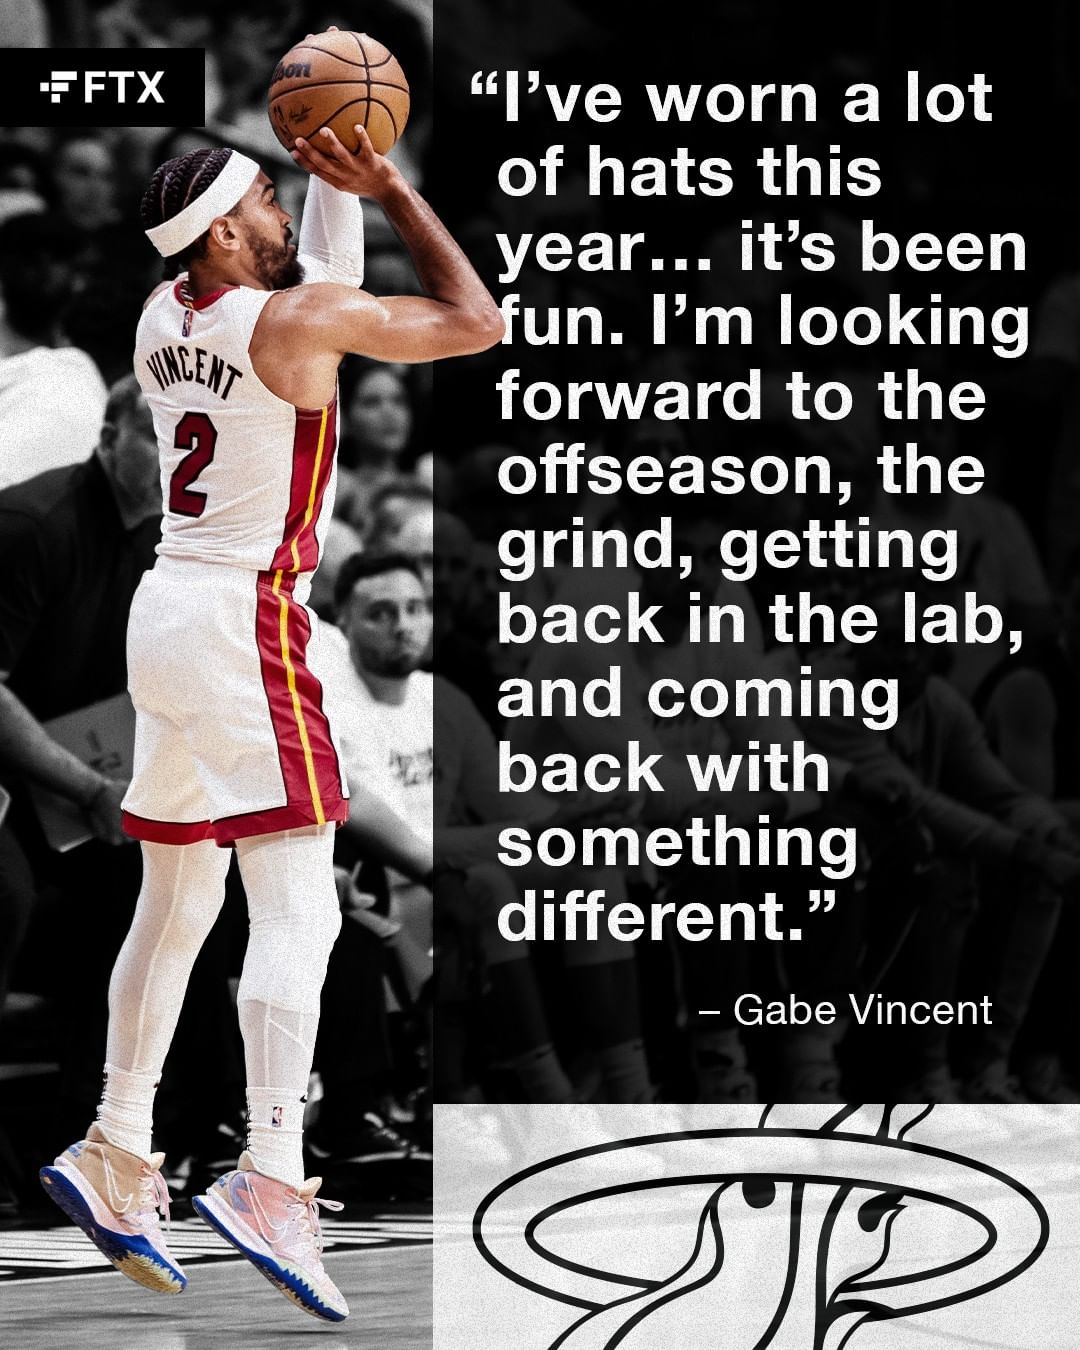 Sights already set on the next challenge  @miamiheat // @ftx_official...